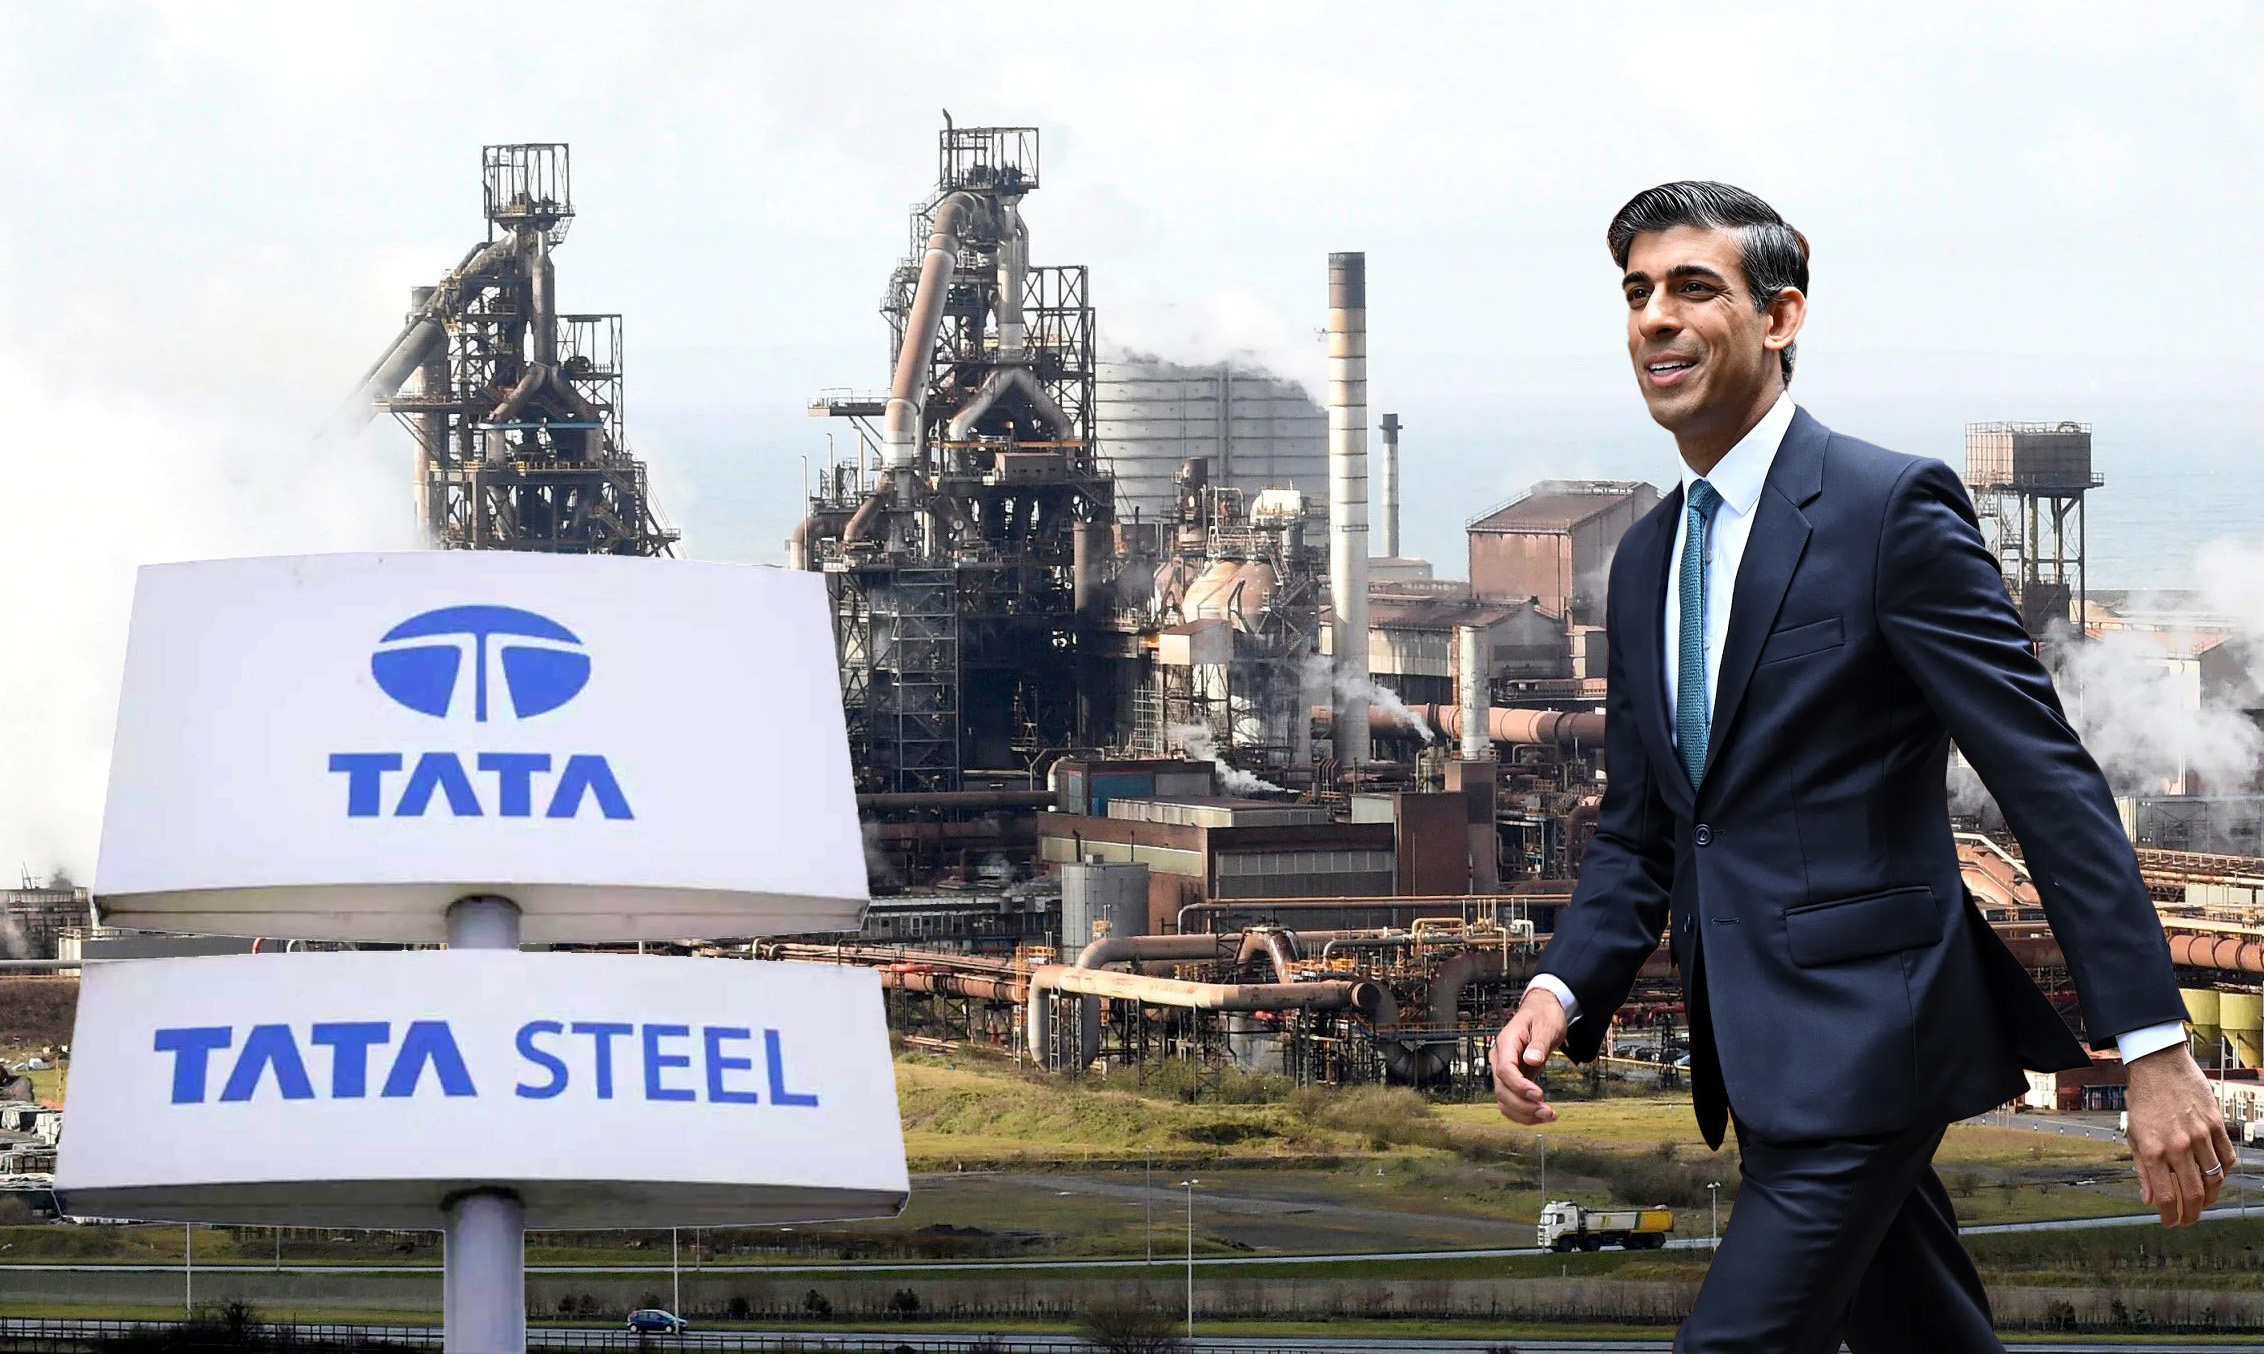 3,000 job losses planned at Tata Steel as company receives £500